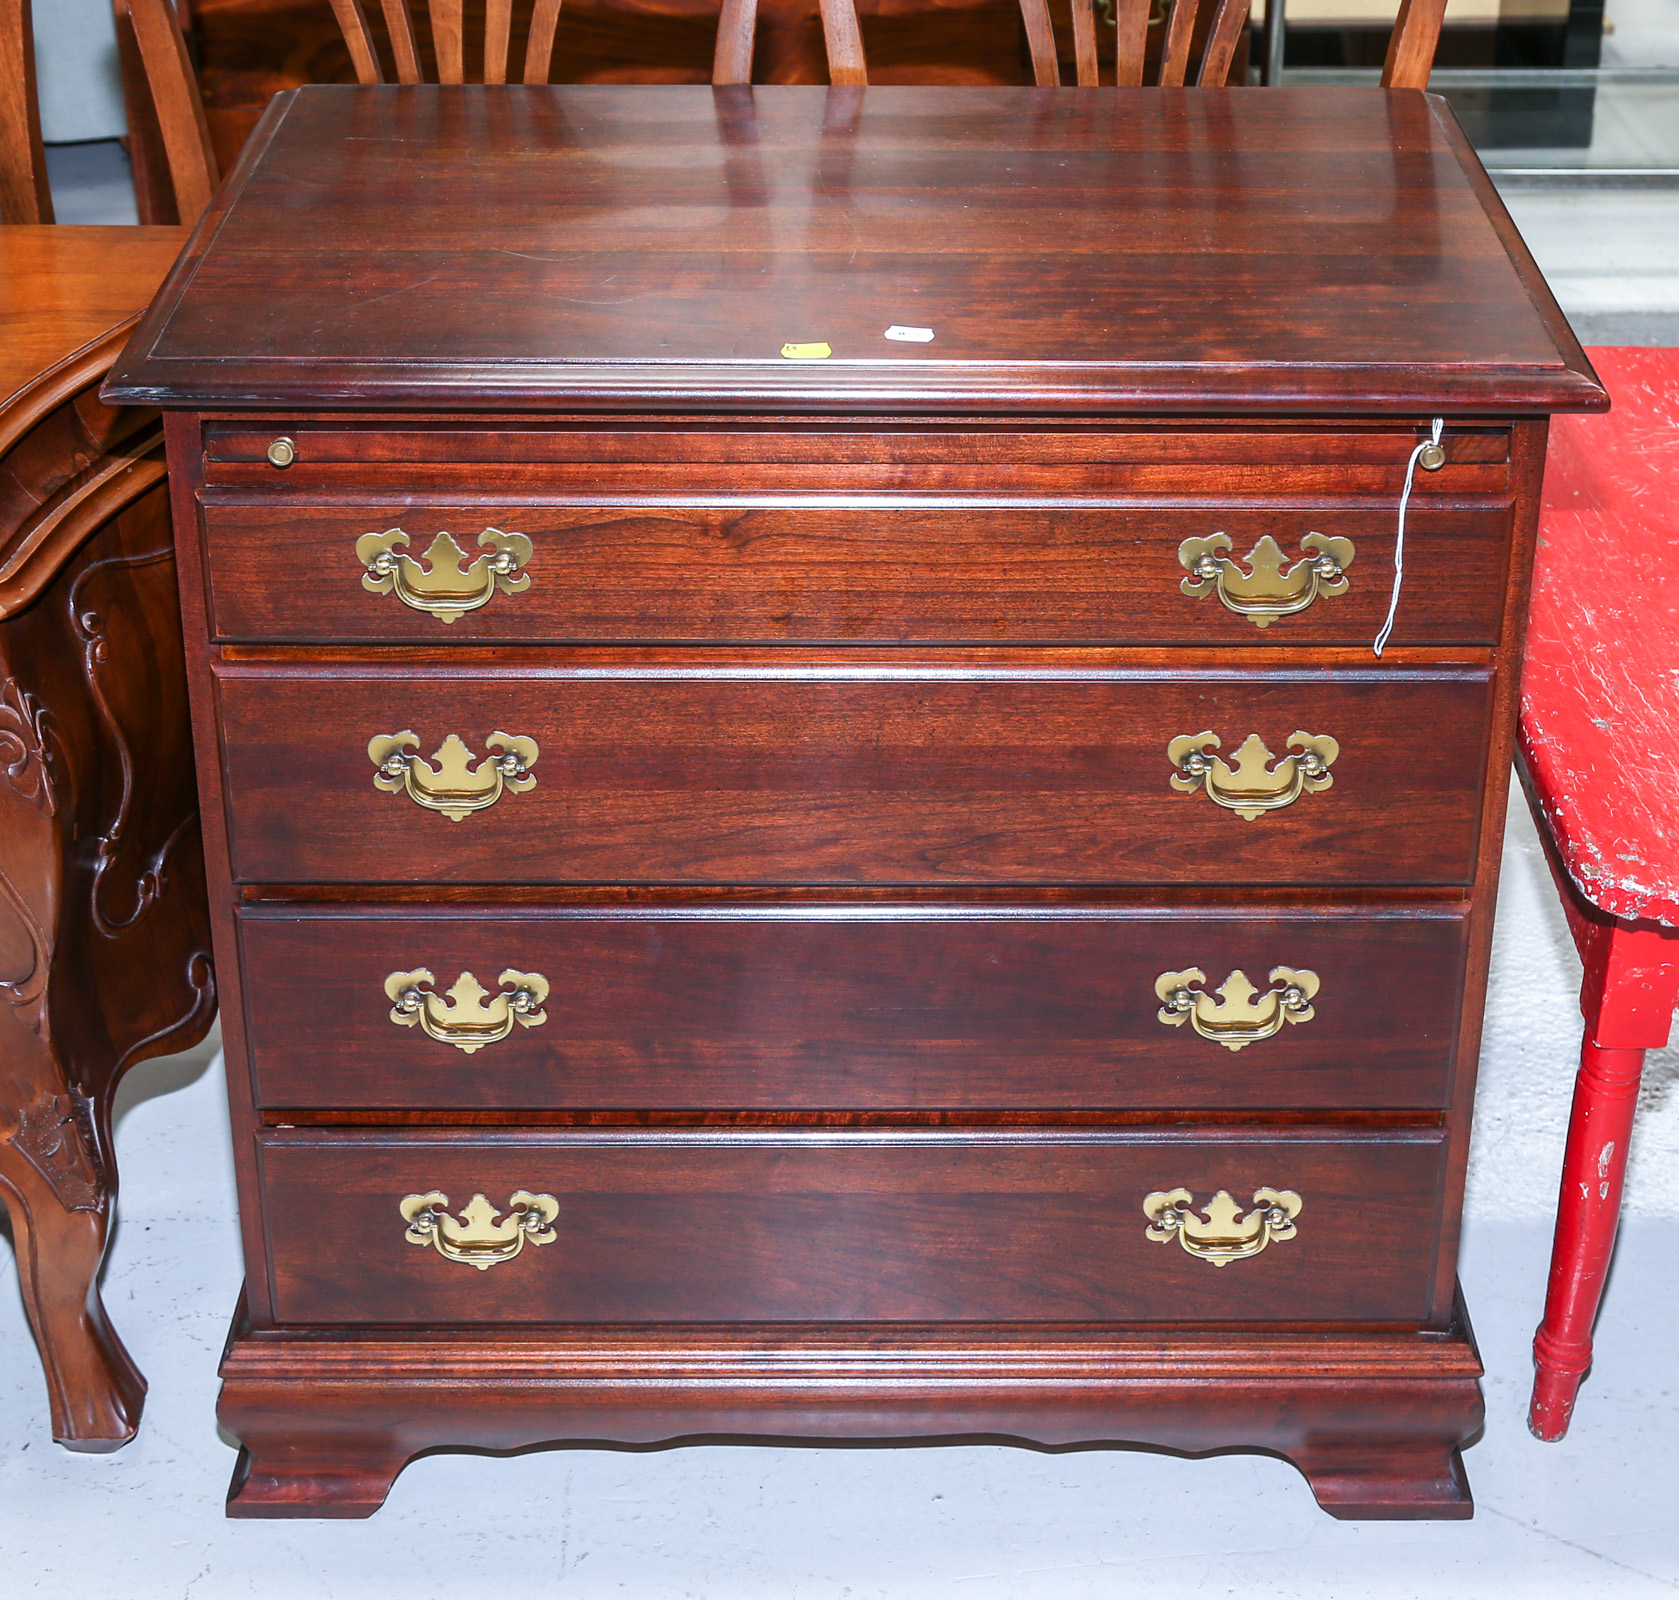 COLONIAL STYLE CHERRY BACHELOR S 2ea271